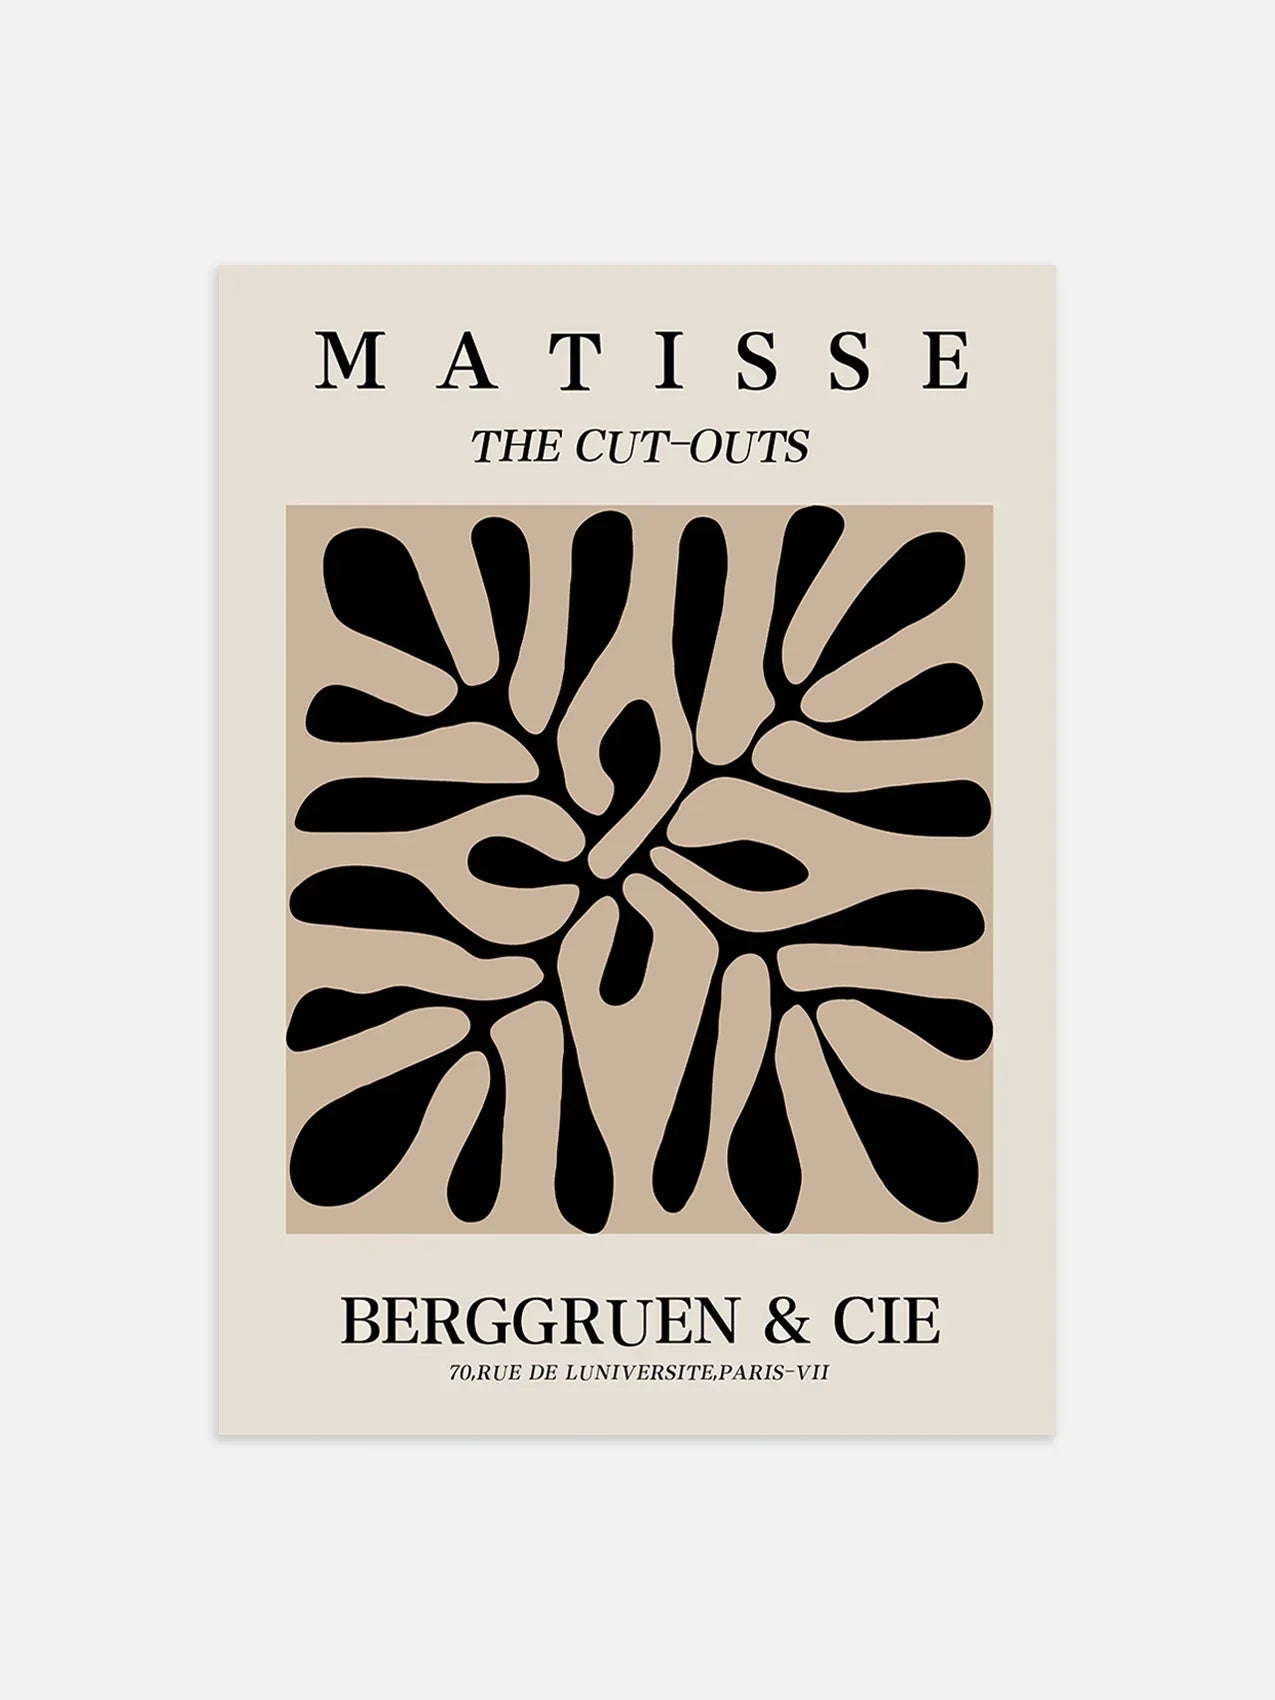 Matisse poster, echibition poster, matisse cut-outs, matisse shapes, beige and black, nordic decor, paris exhibition poster, matisse print, matisse wall art, matisse beige poster. Beige home decor, black and white poster. Famous artist gallery poster - 01Posterstreet.com